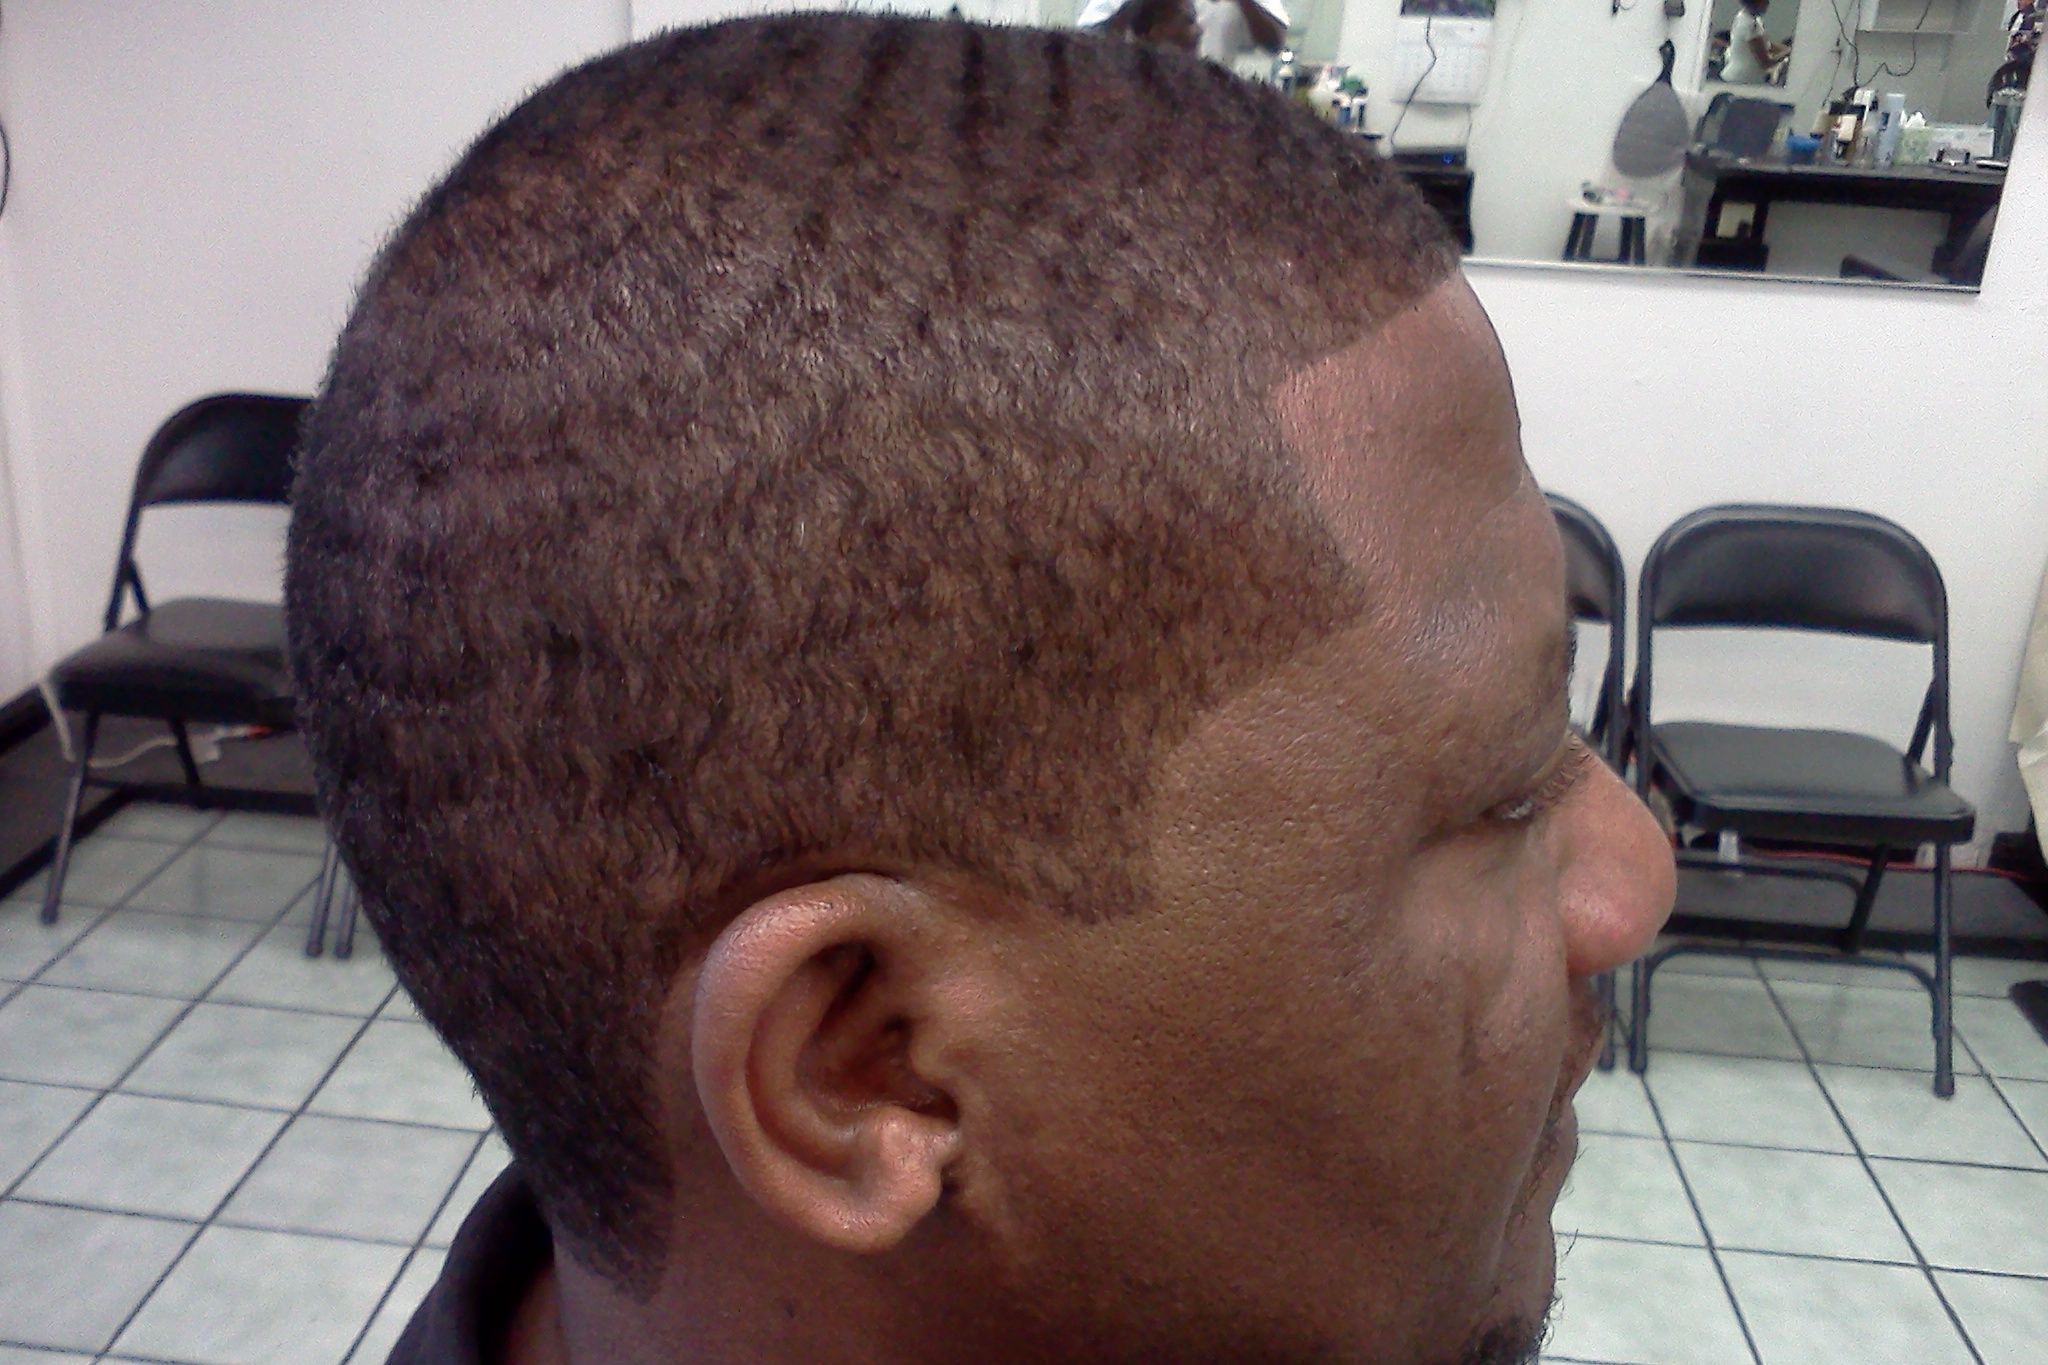 Even Haircut, Level 1½ or Less (face not included) portfolio